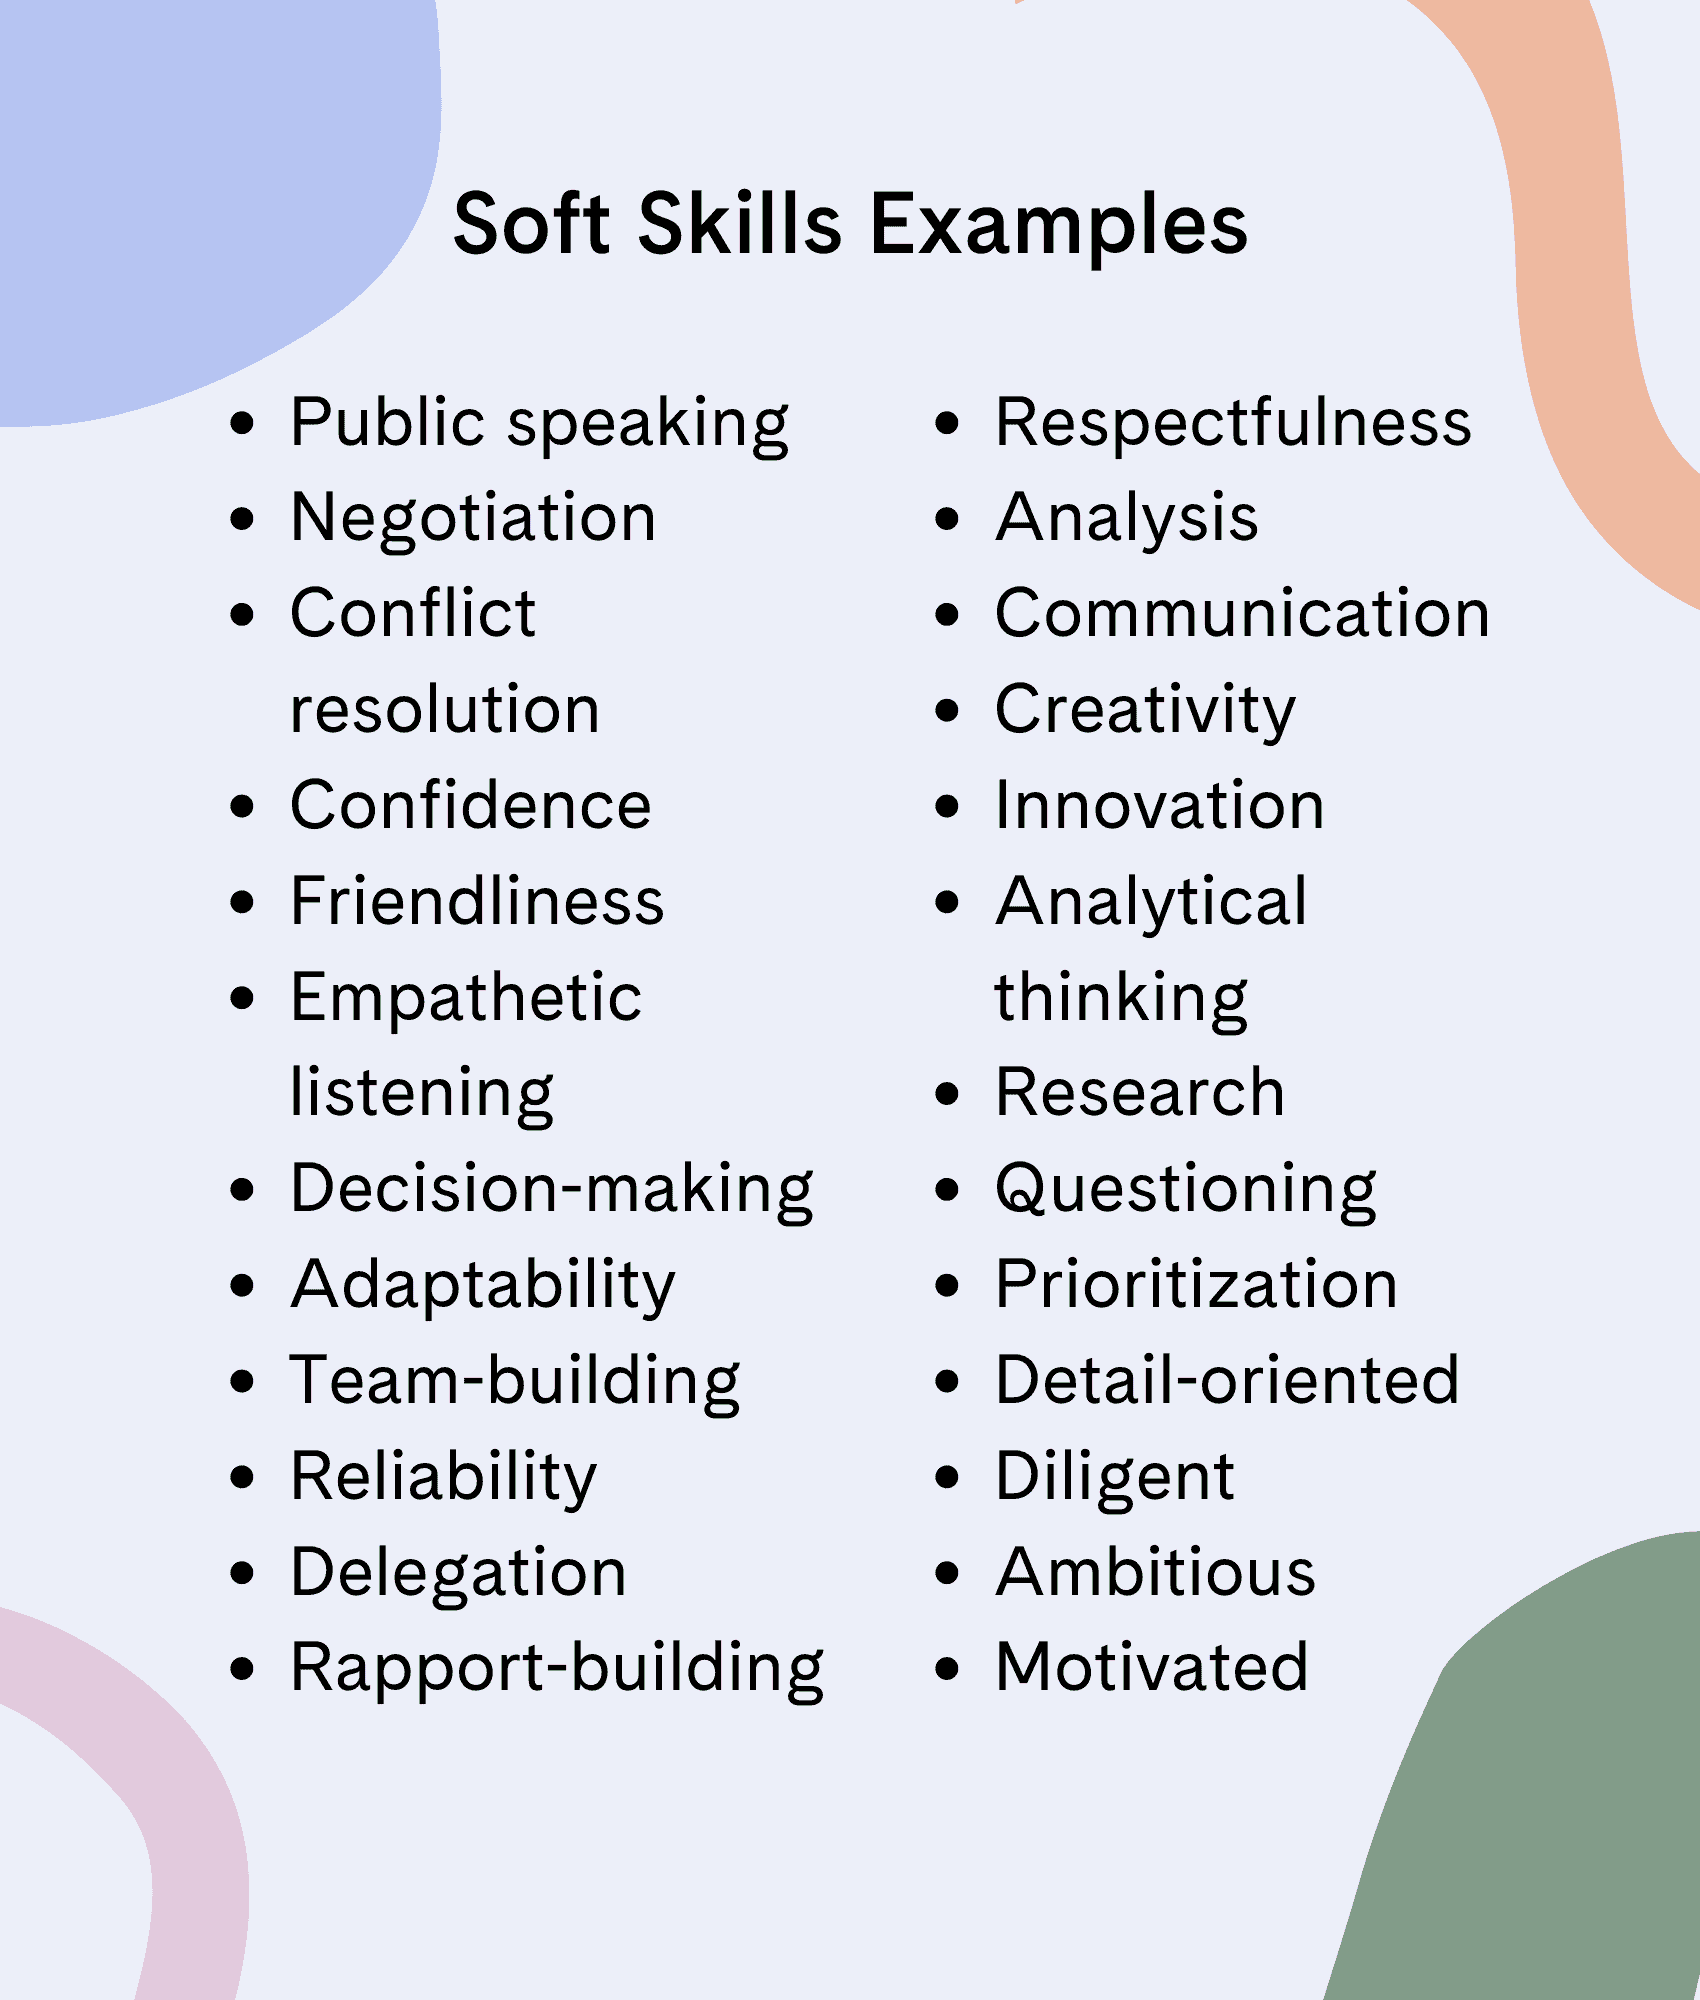 research on soft skills in education